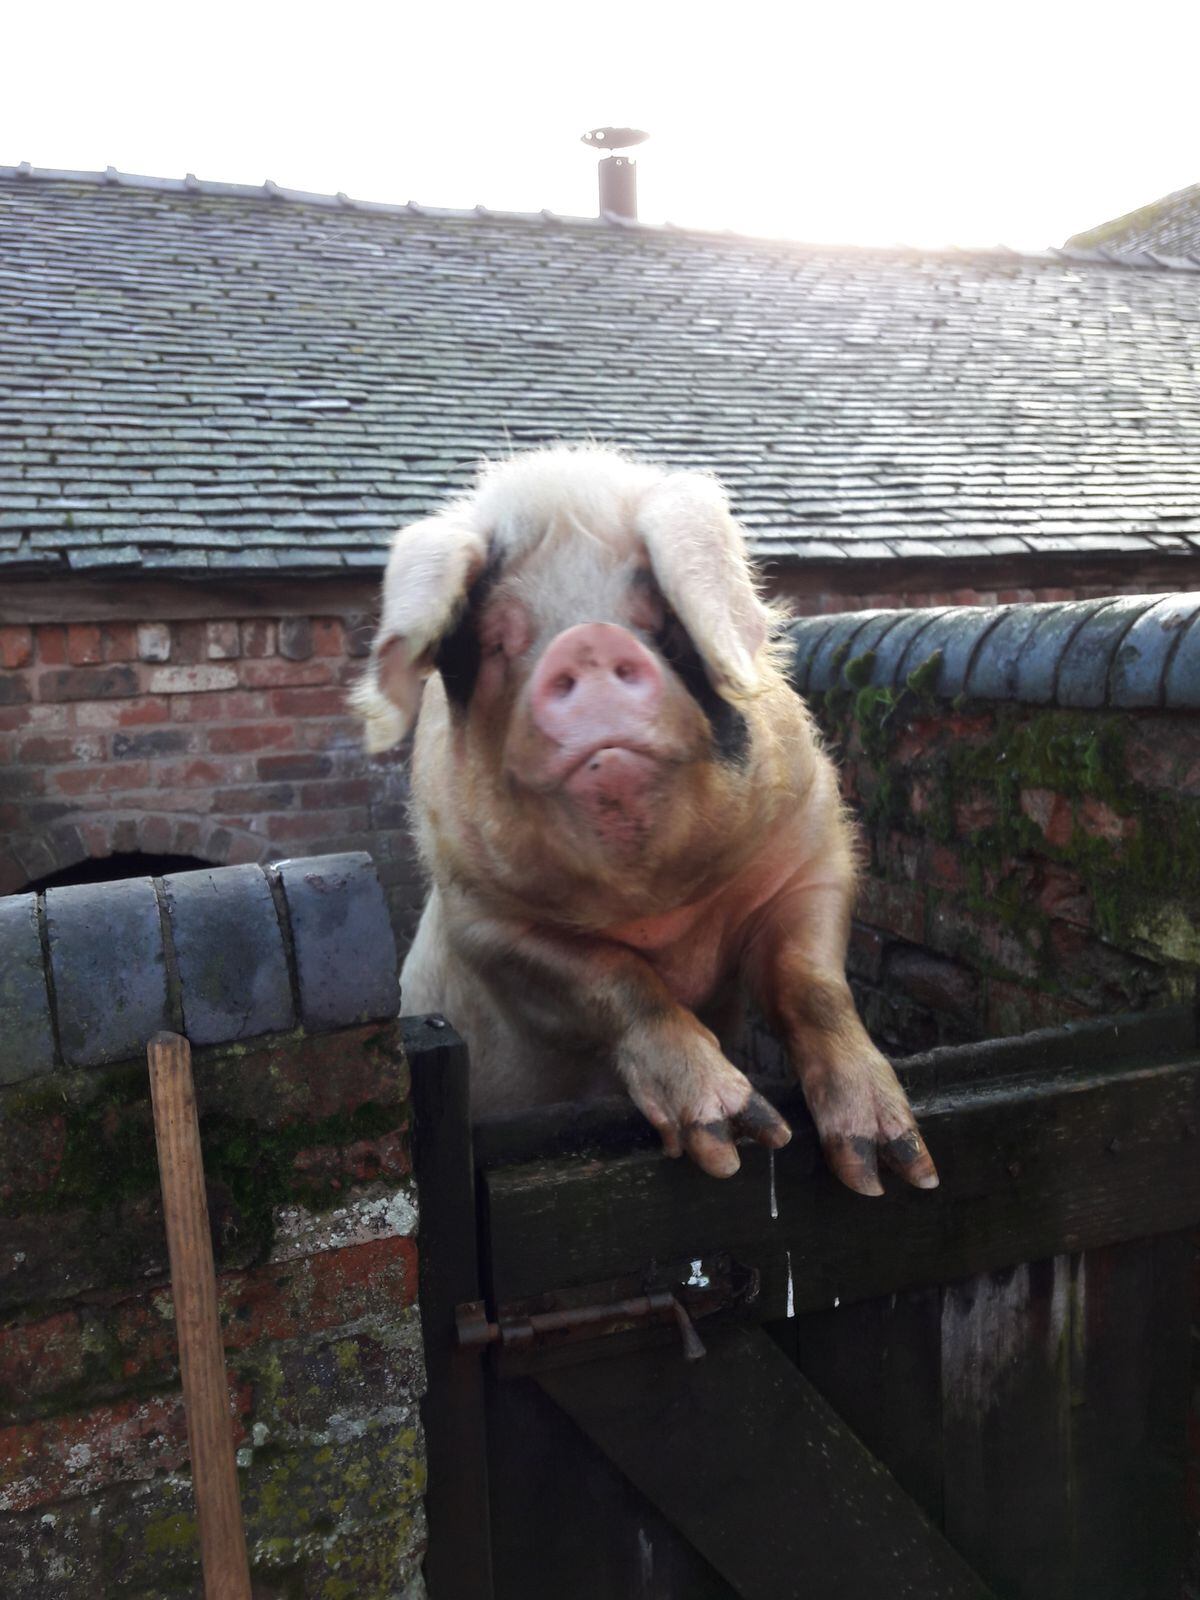 A resident pig at Acton Scott Historic Working Farm